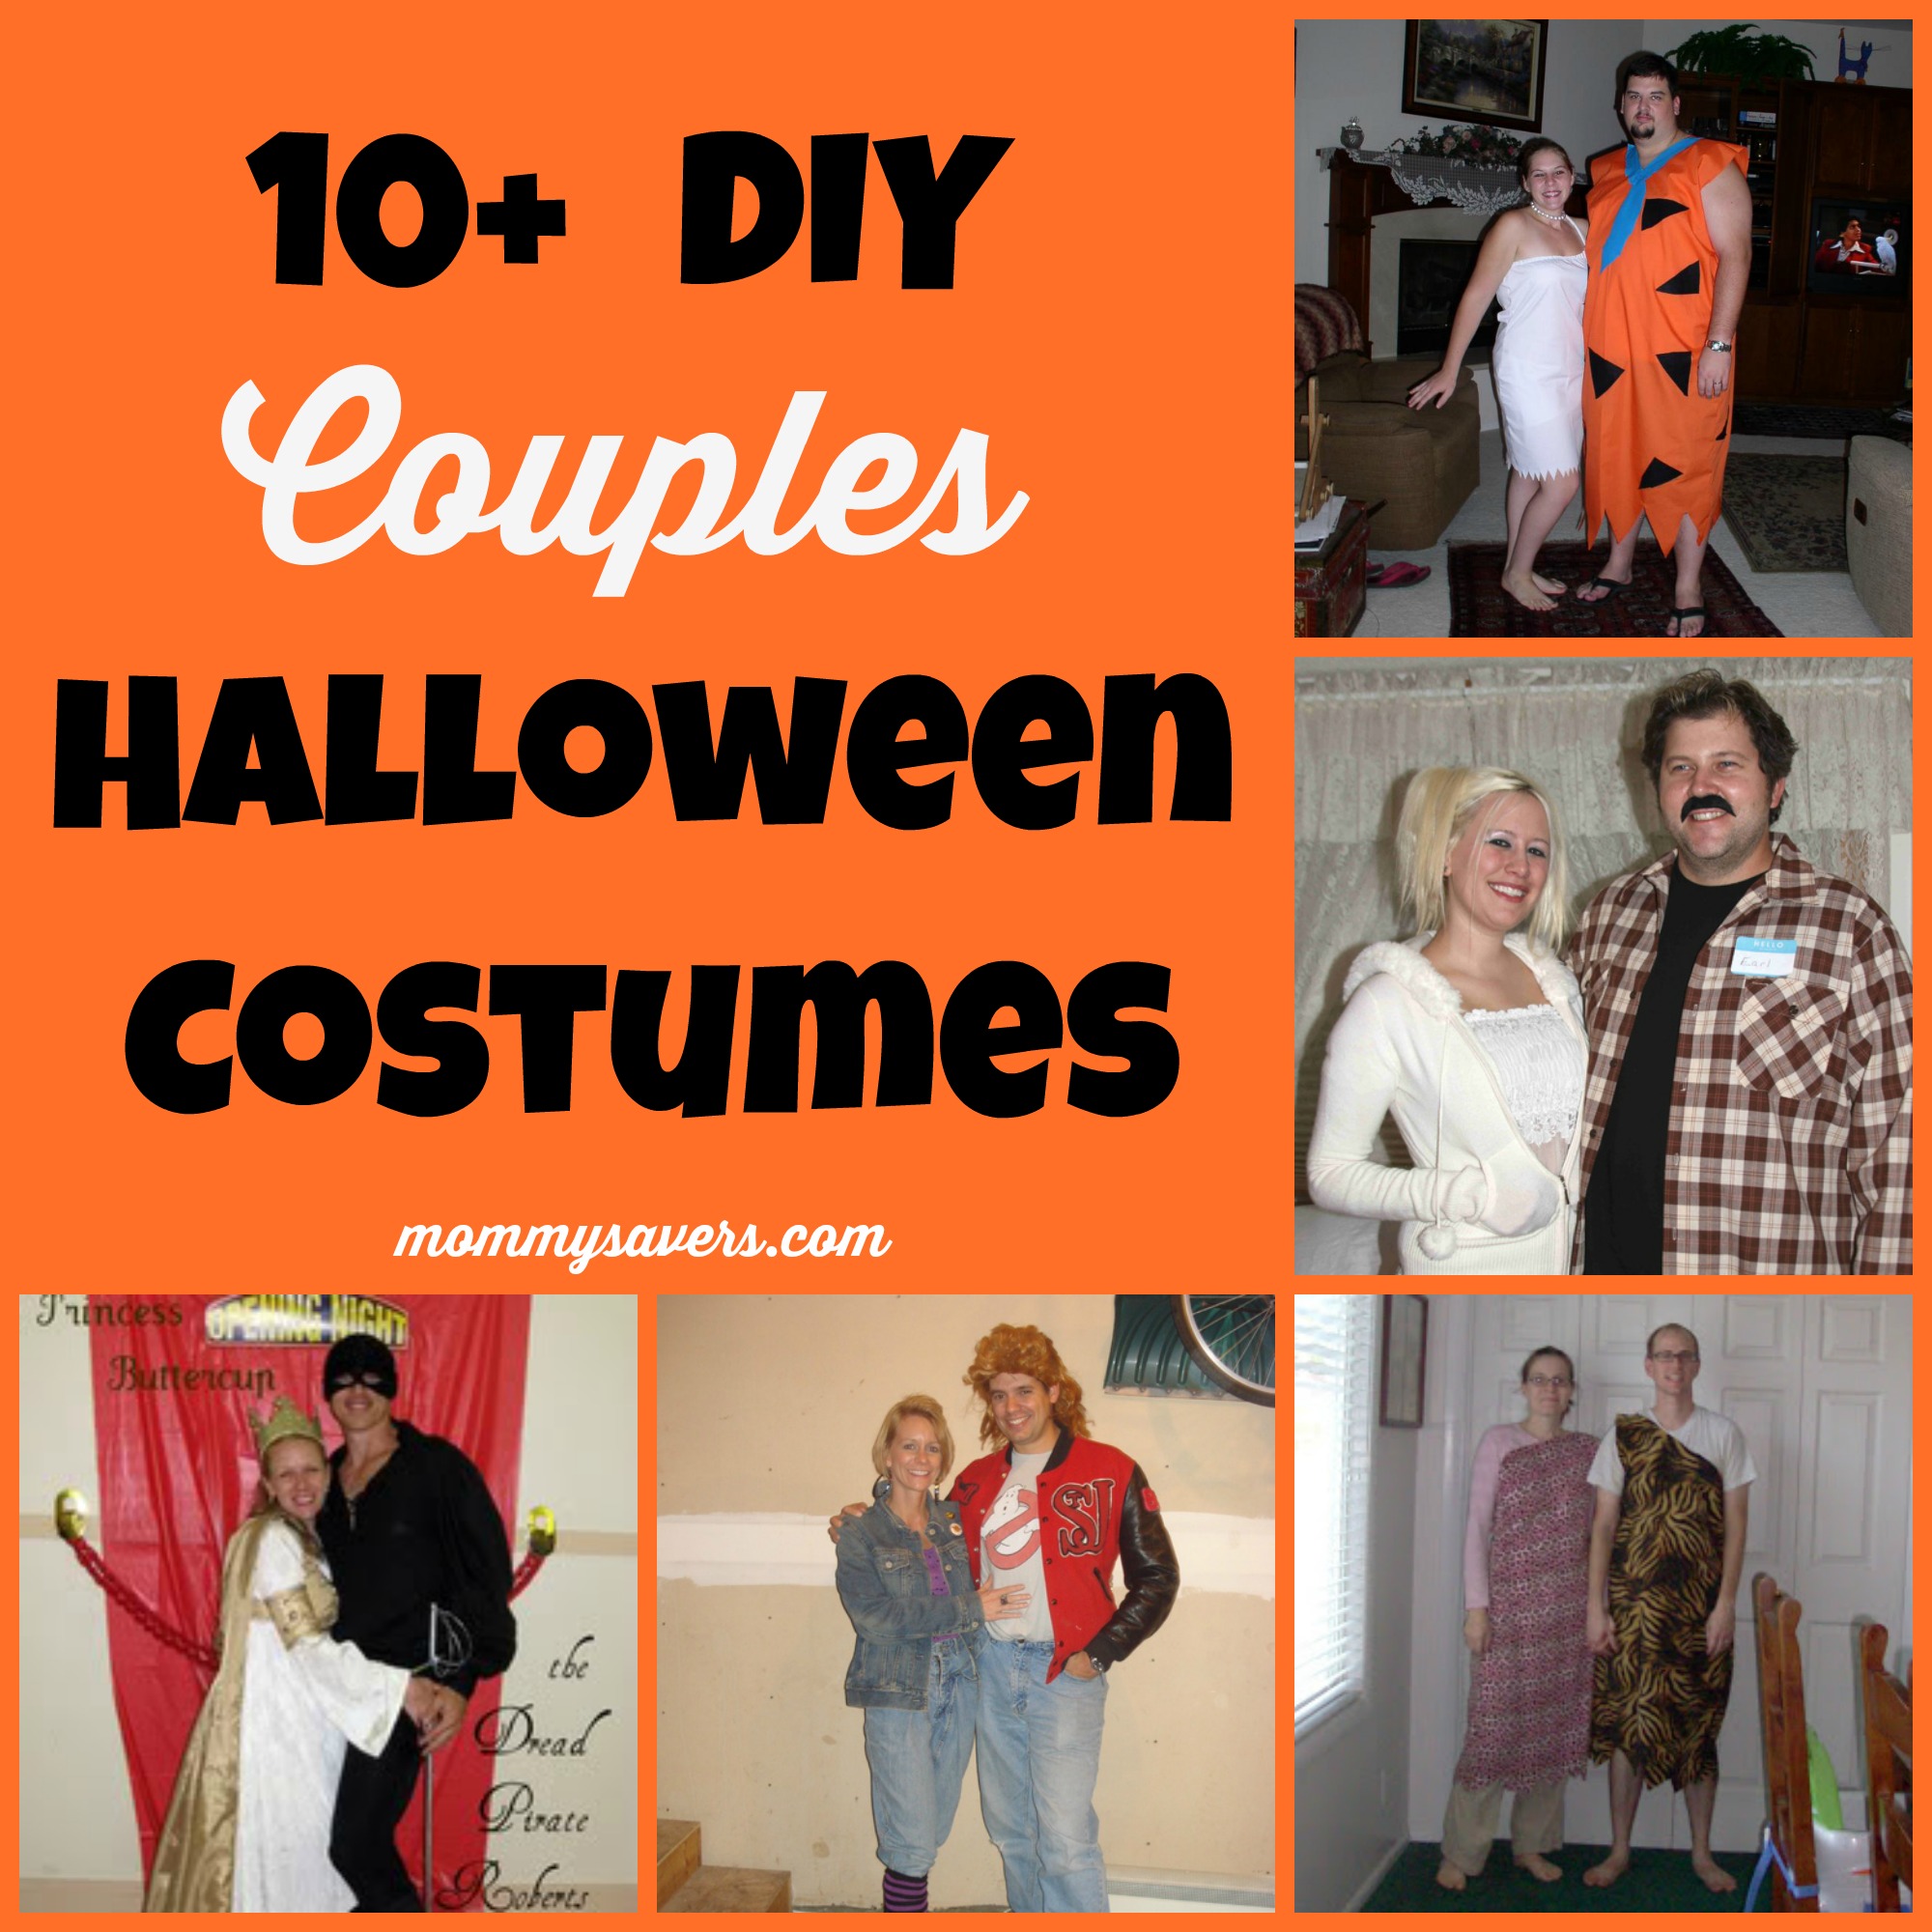 occasions diy couples costumes fashion adults special  halloween diy diy halloween   projects couples for costumes